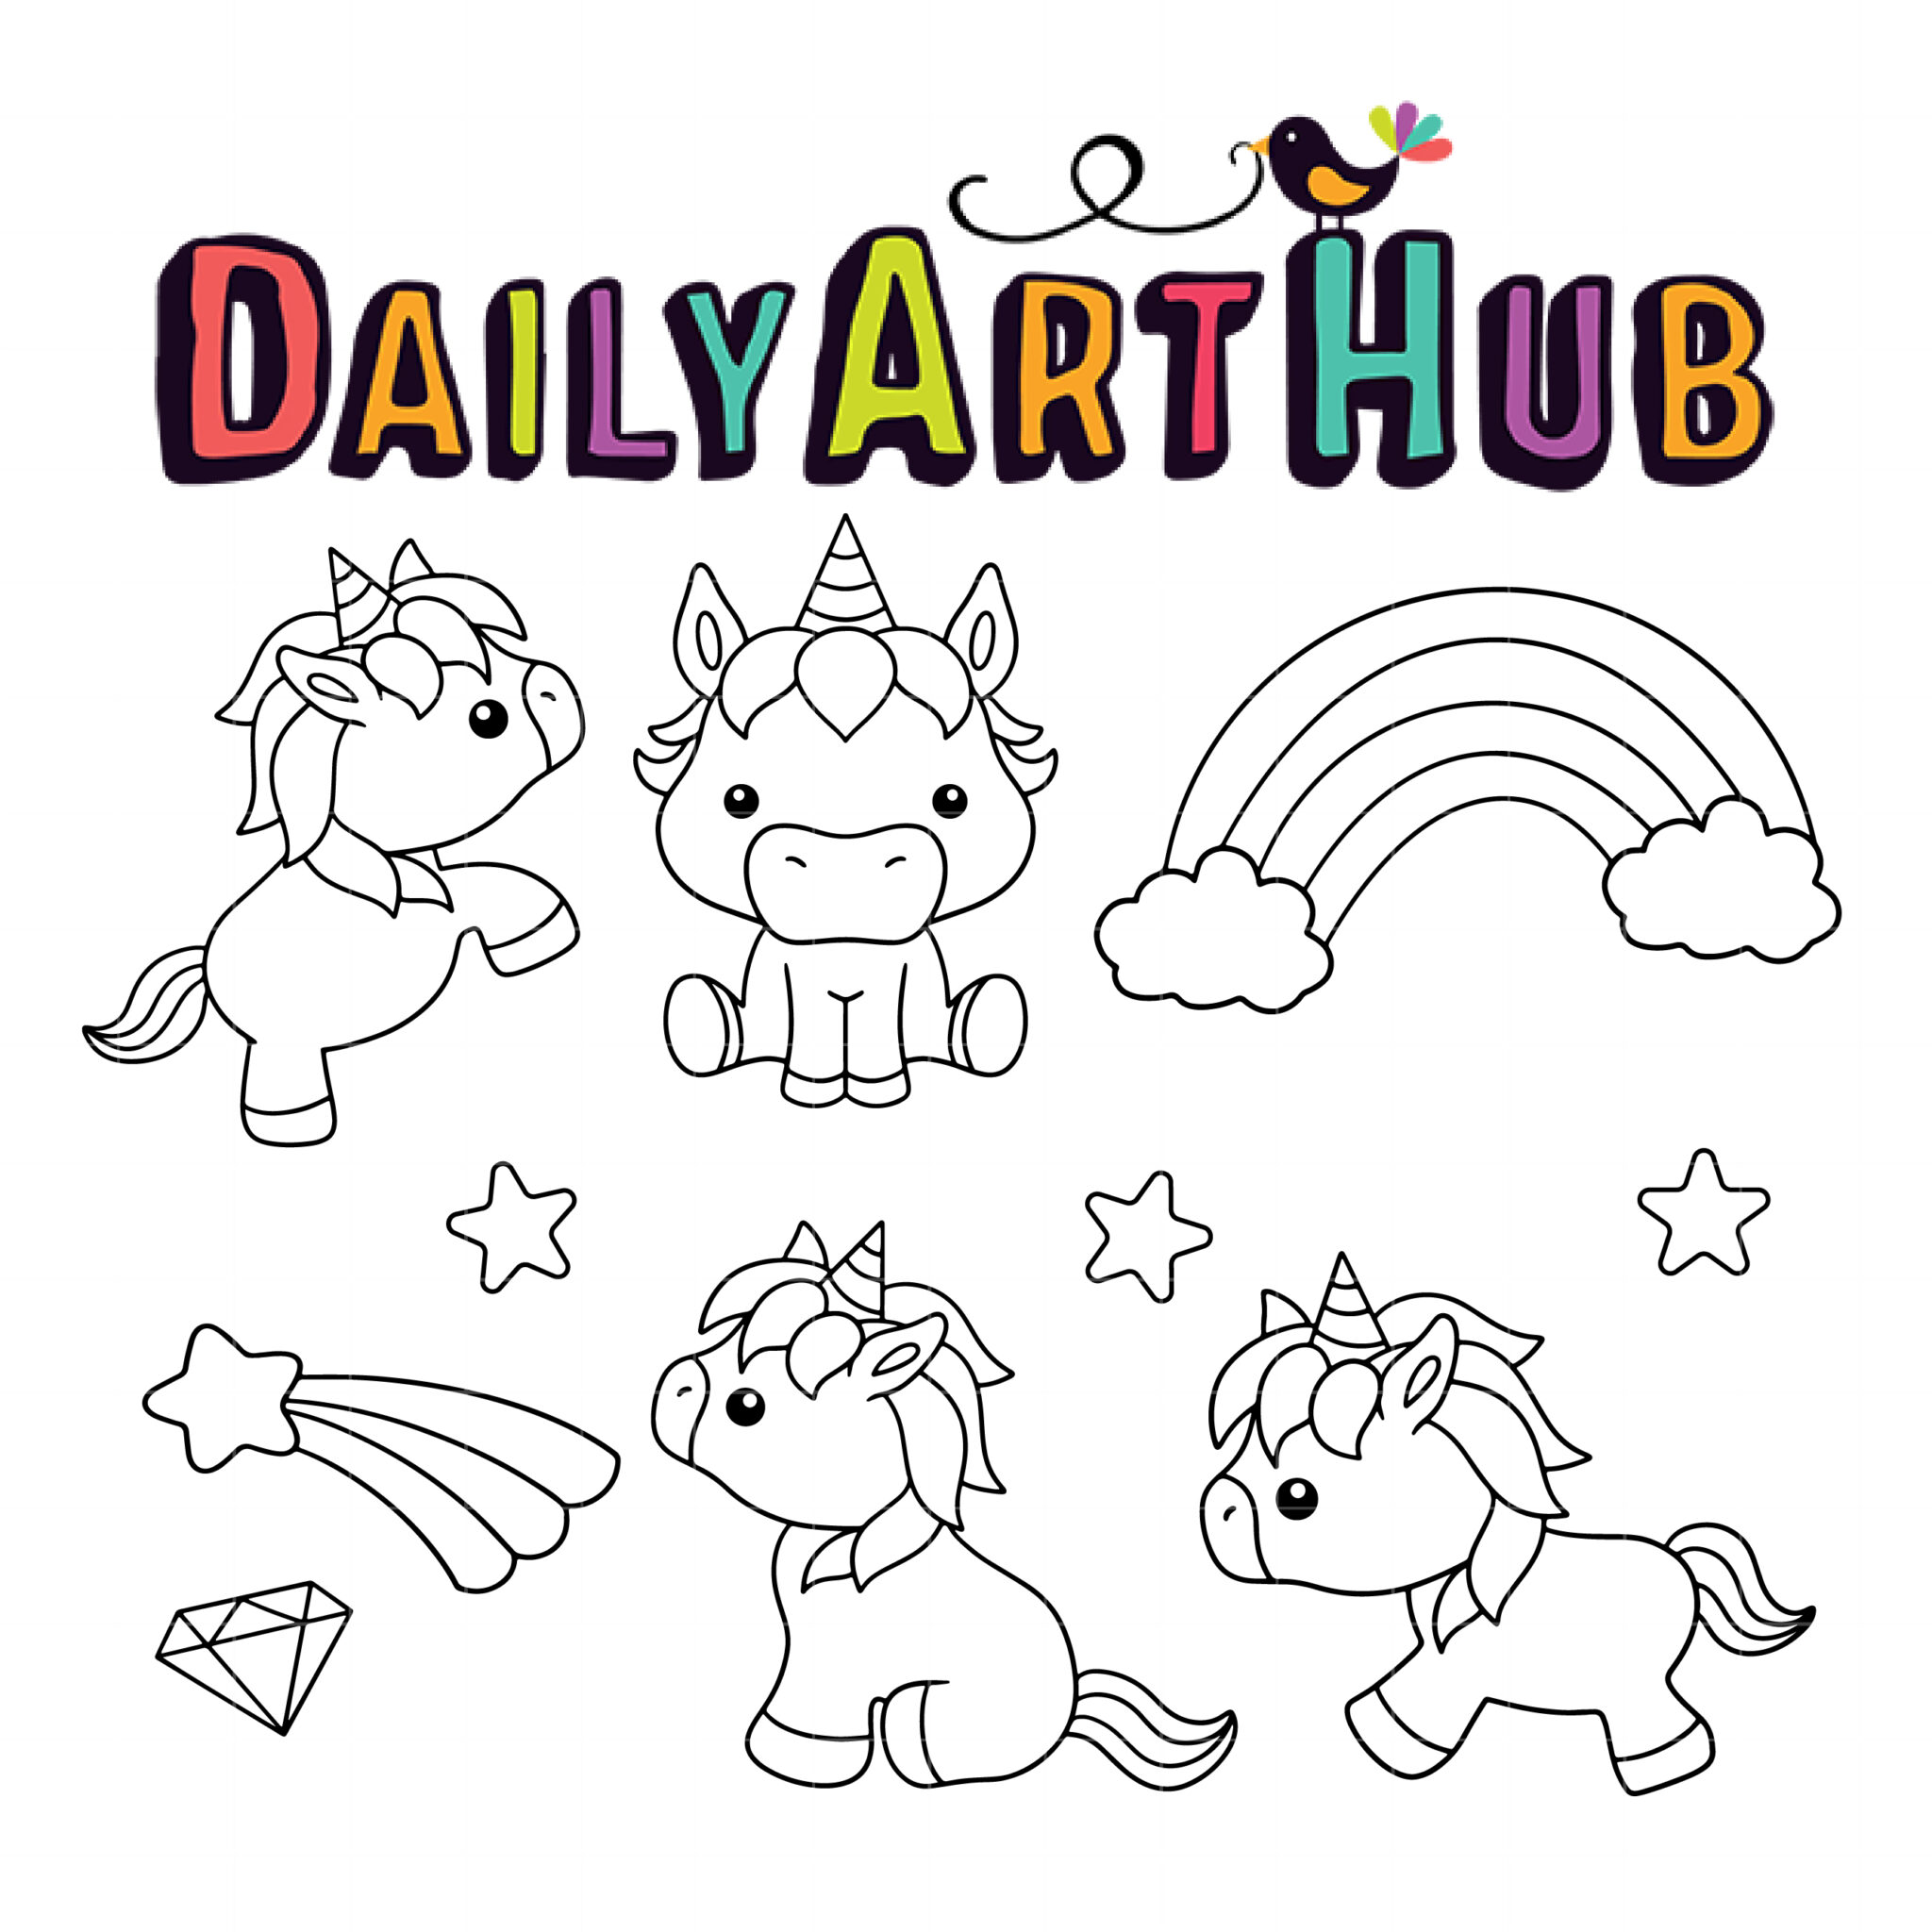 How to Draw a Cute Unicorn in 5 Easy Steps